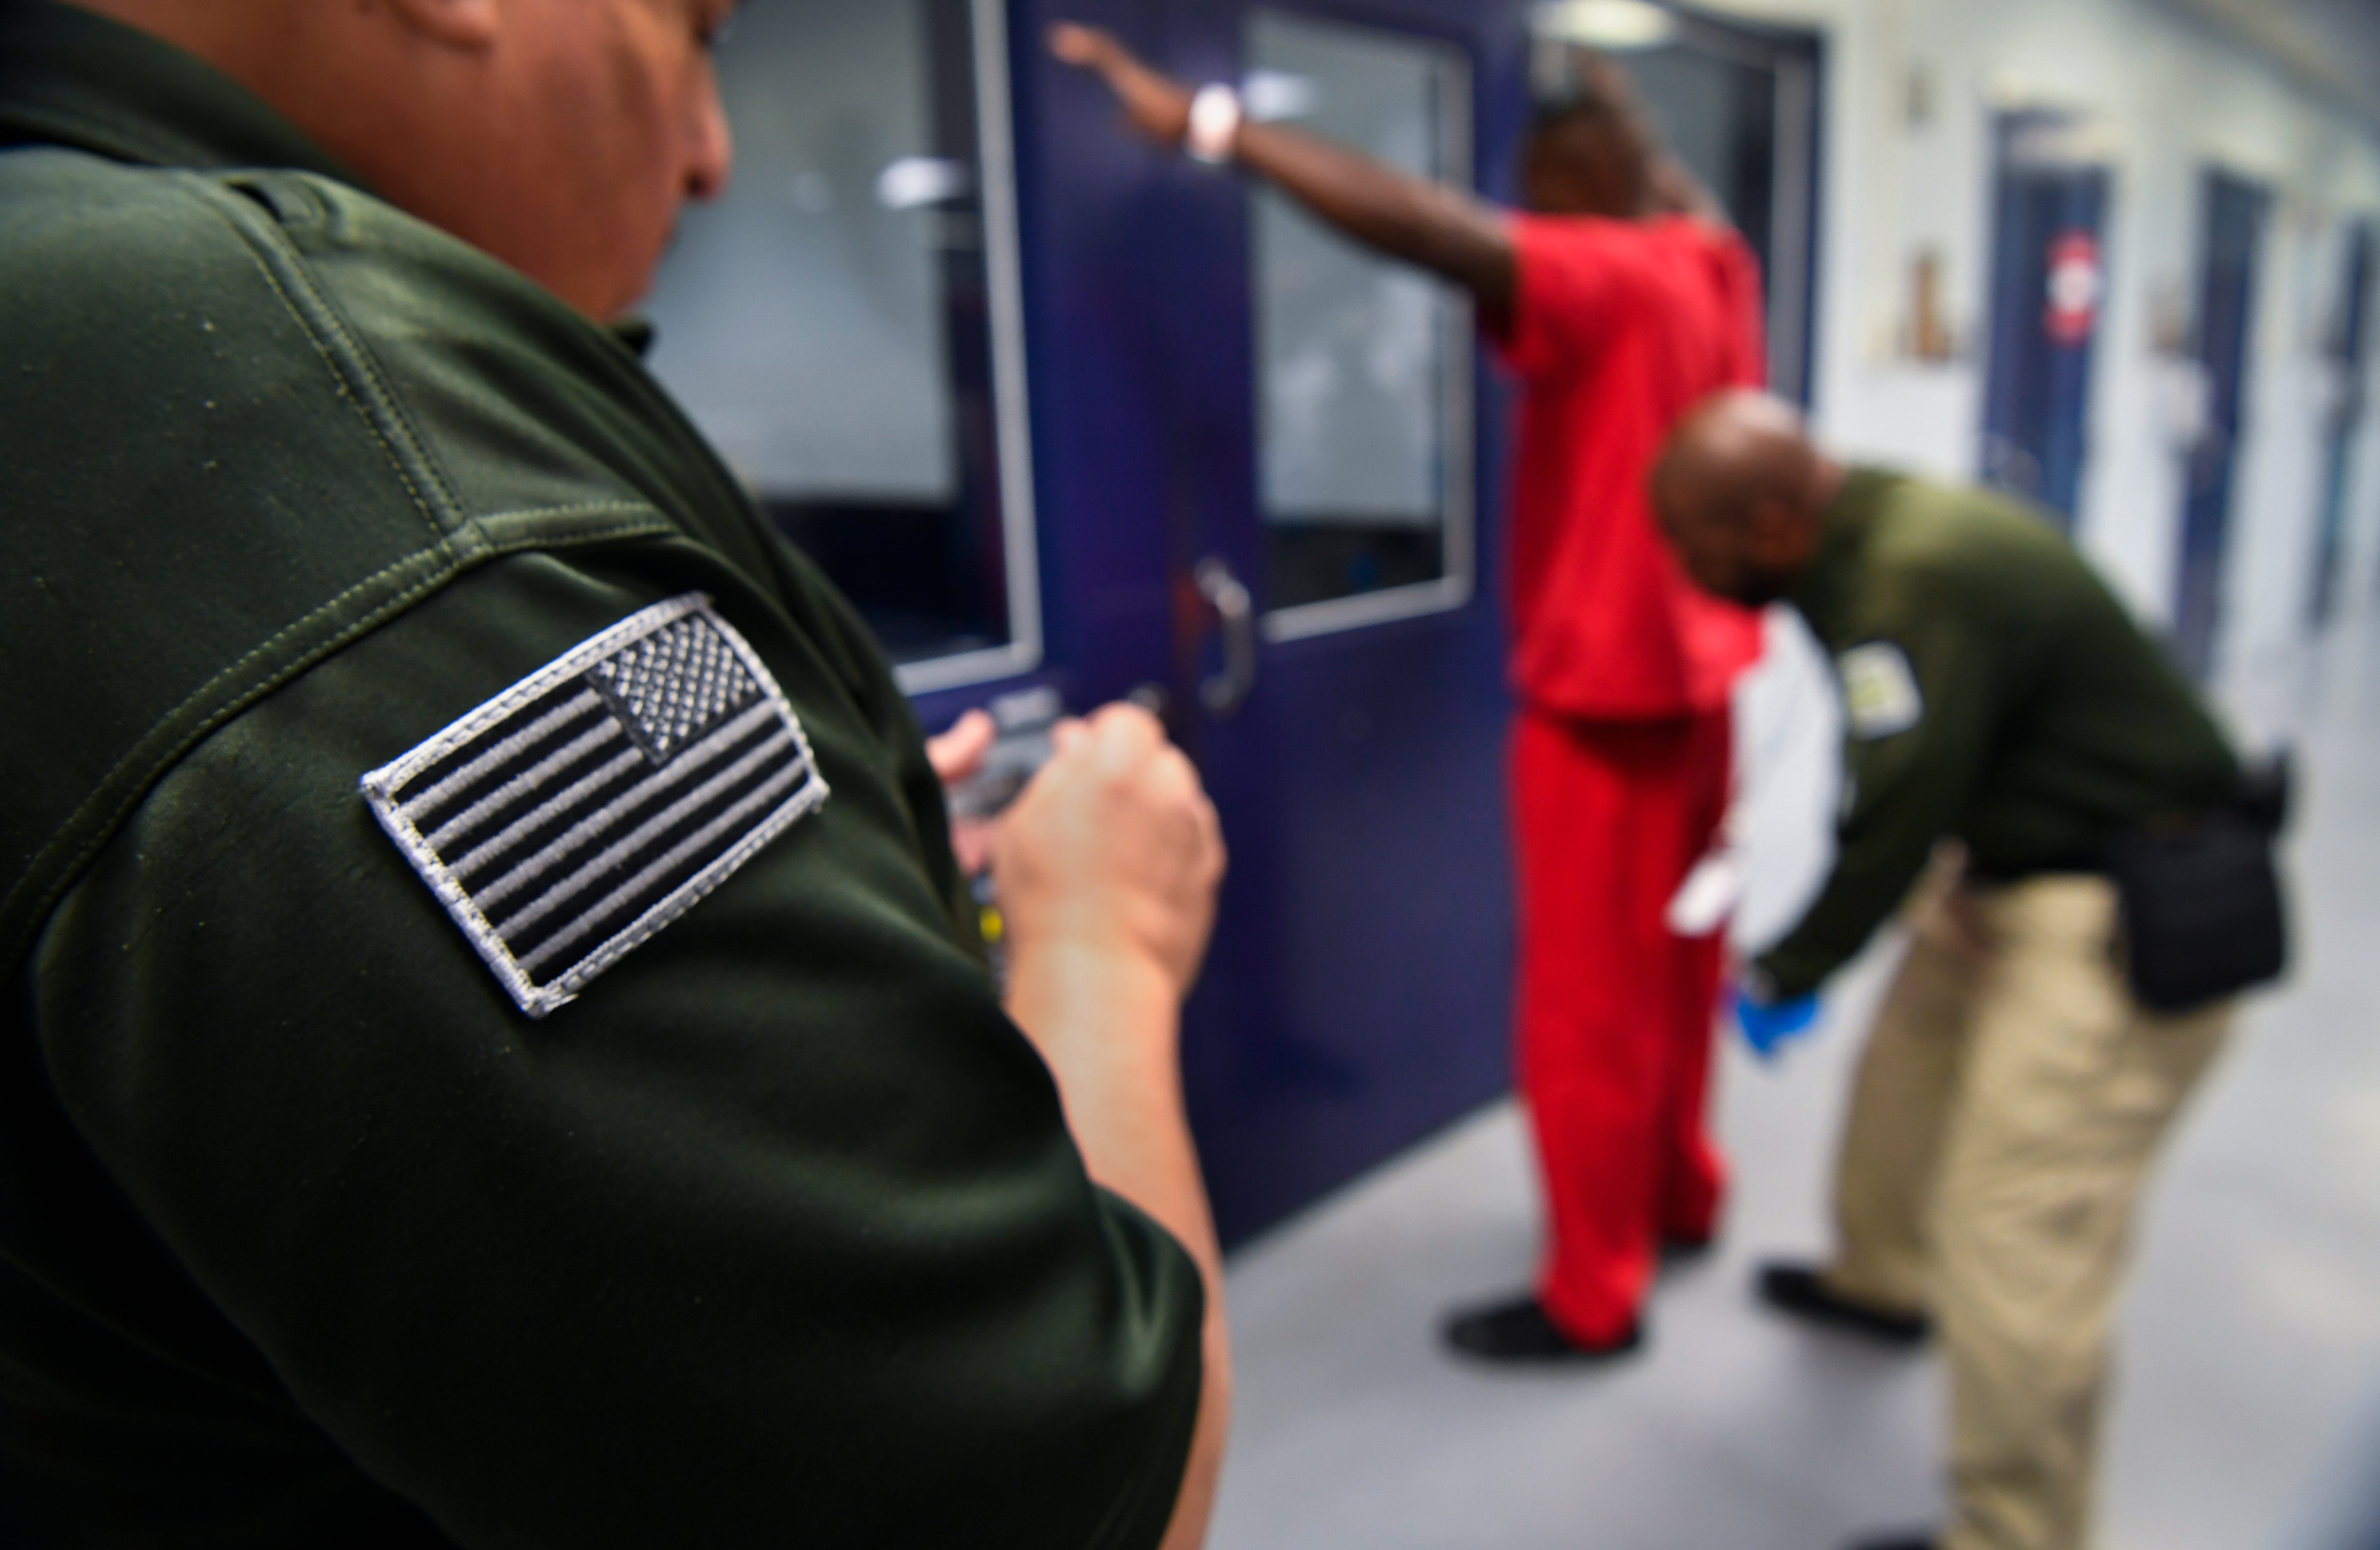 ​Incoming and outgoing immigration detainees are processed at the Krome Service Processing Center in Miami, Florida. Krome is an Immigration and Customs Enforcement (ICE) detention facility housing over 650 ICE detainees per day. 
​